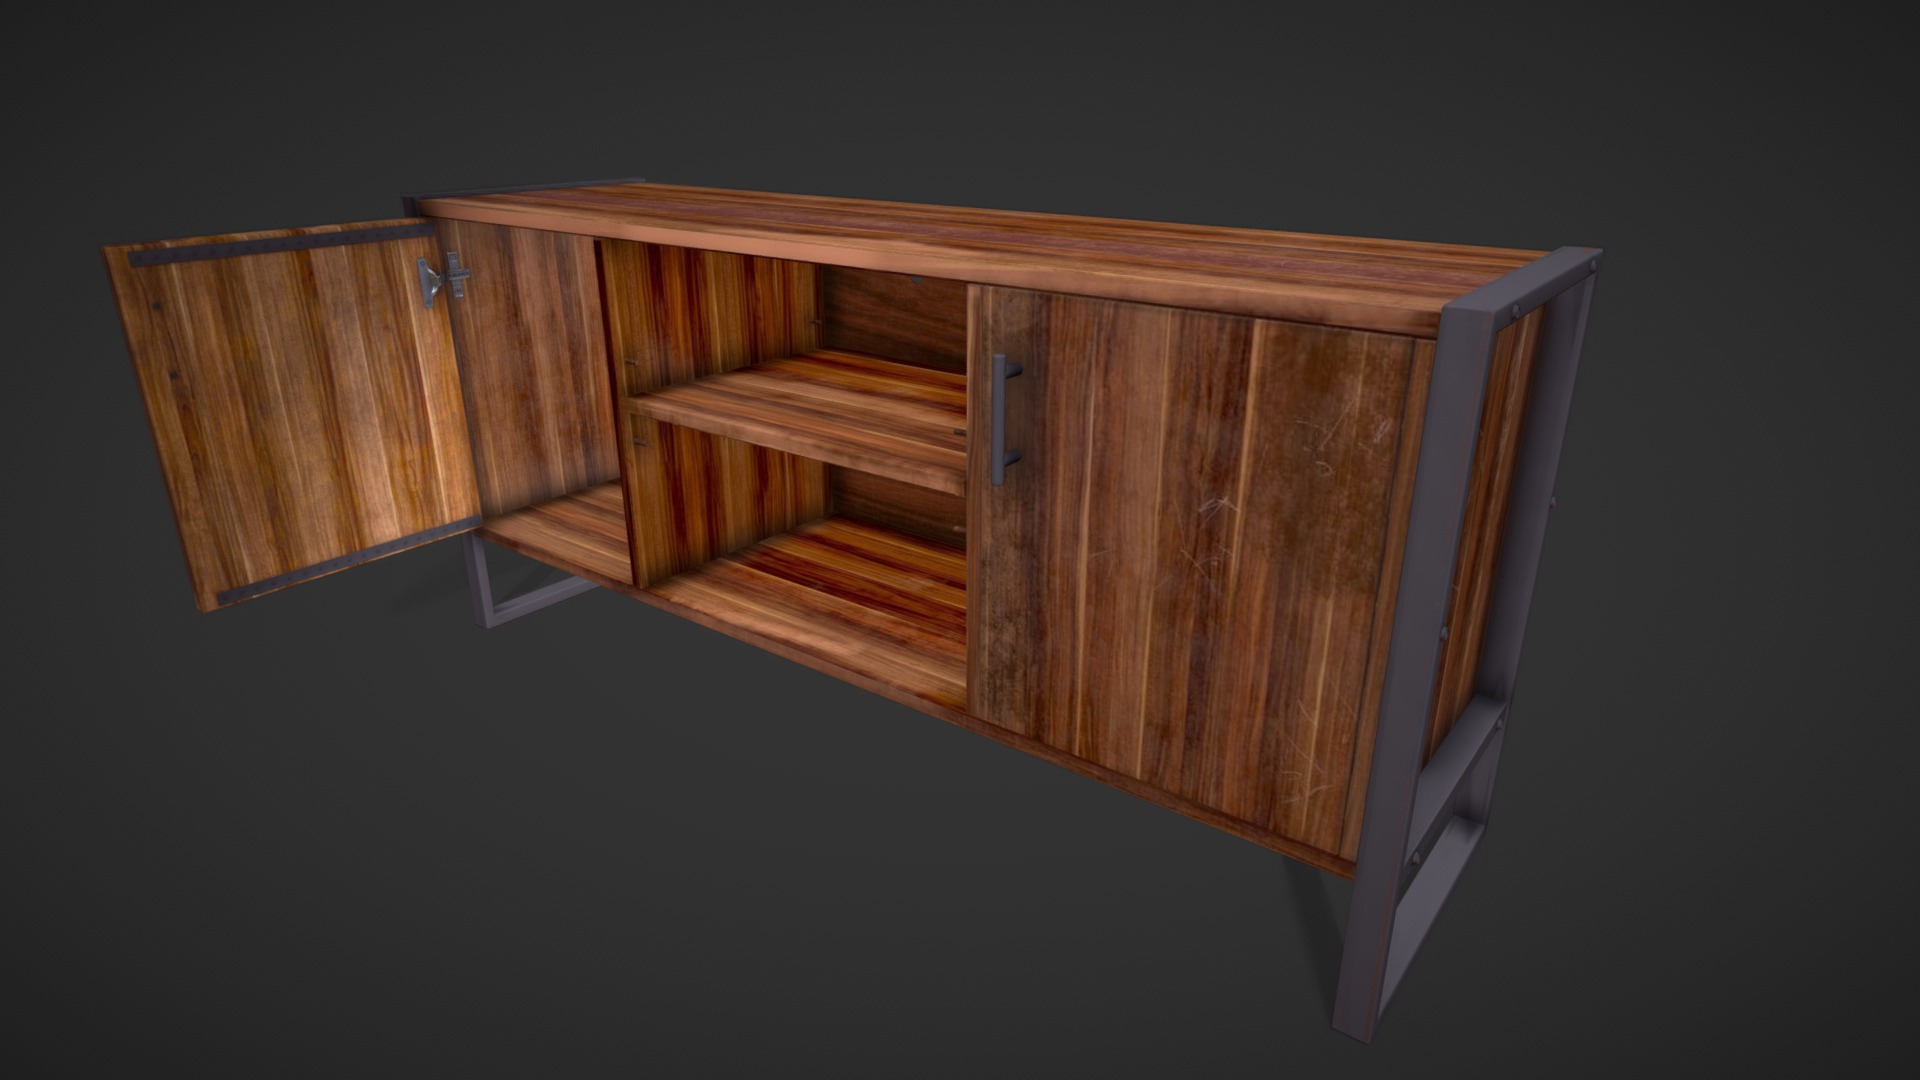 3D model Biltmore TV Stand - This is a 3D model of the Biltmore TV Stand. The 3D model is about a wooden cabinet with drawers.